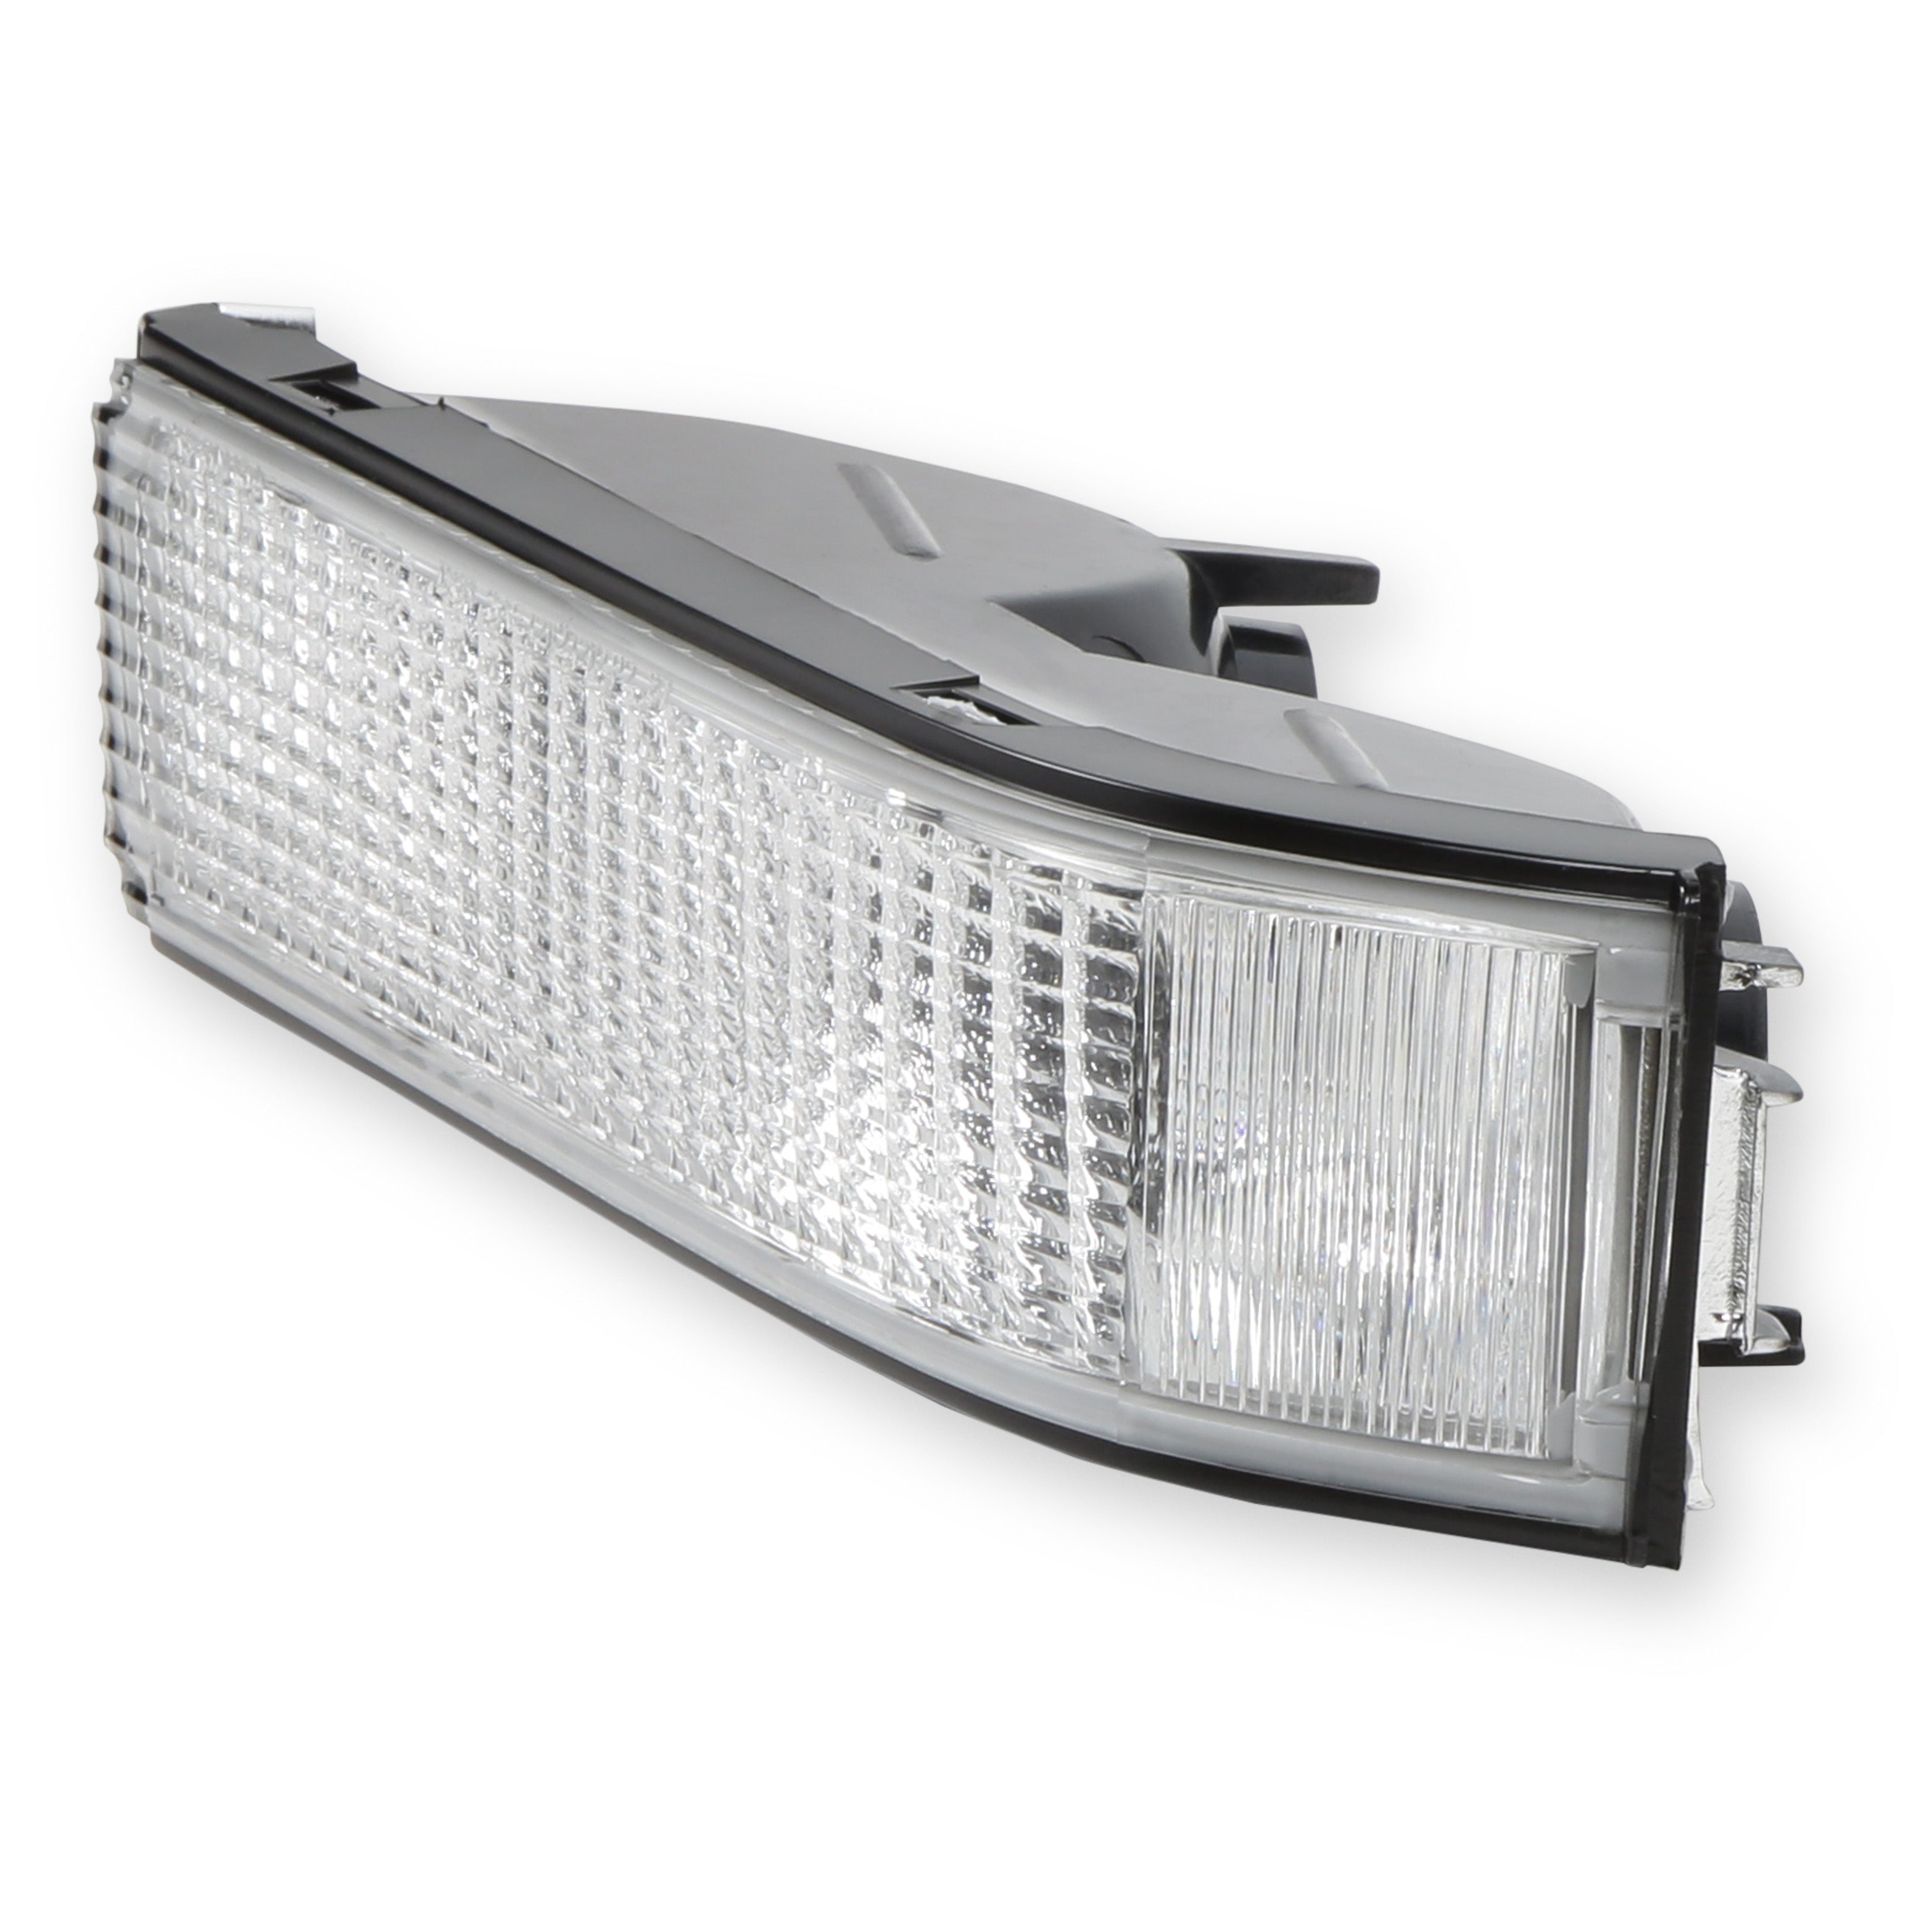 BROTHERS GMT400 Single Headlight Parking Lamp - Clear - LH pn 07-117